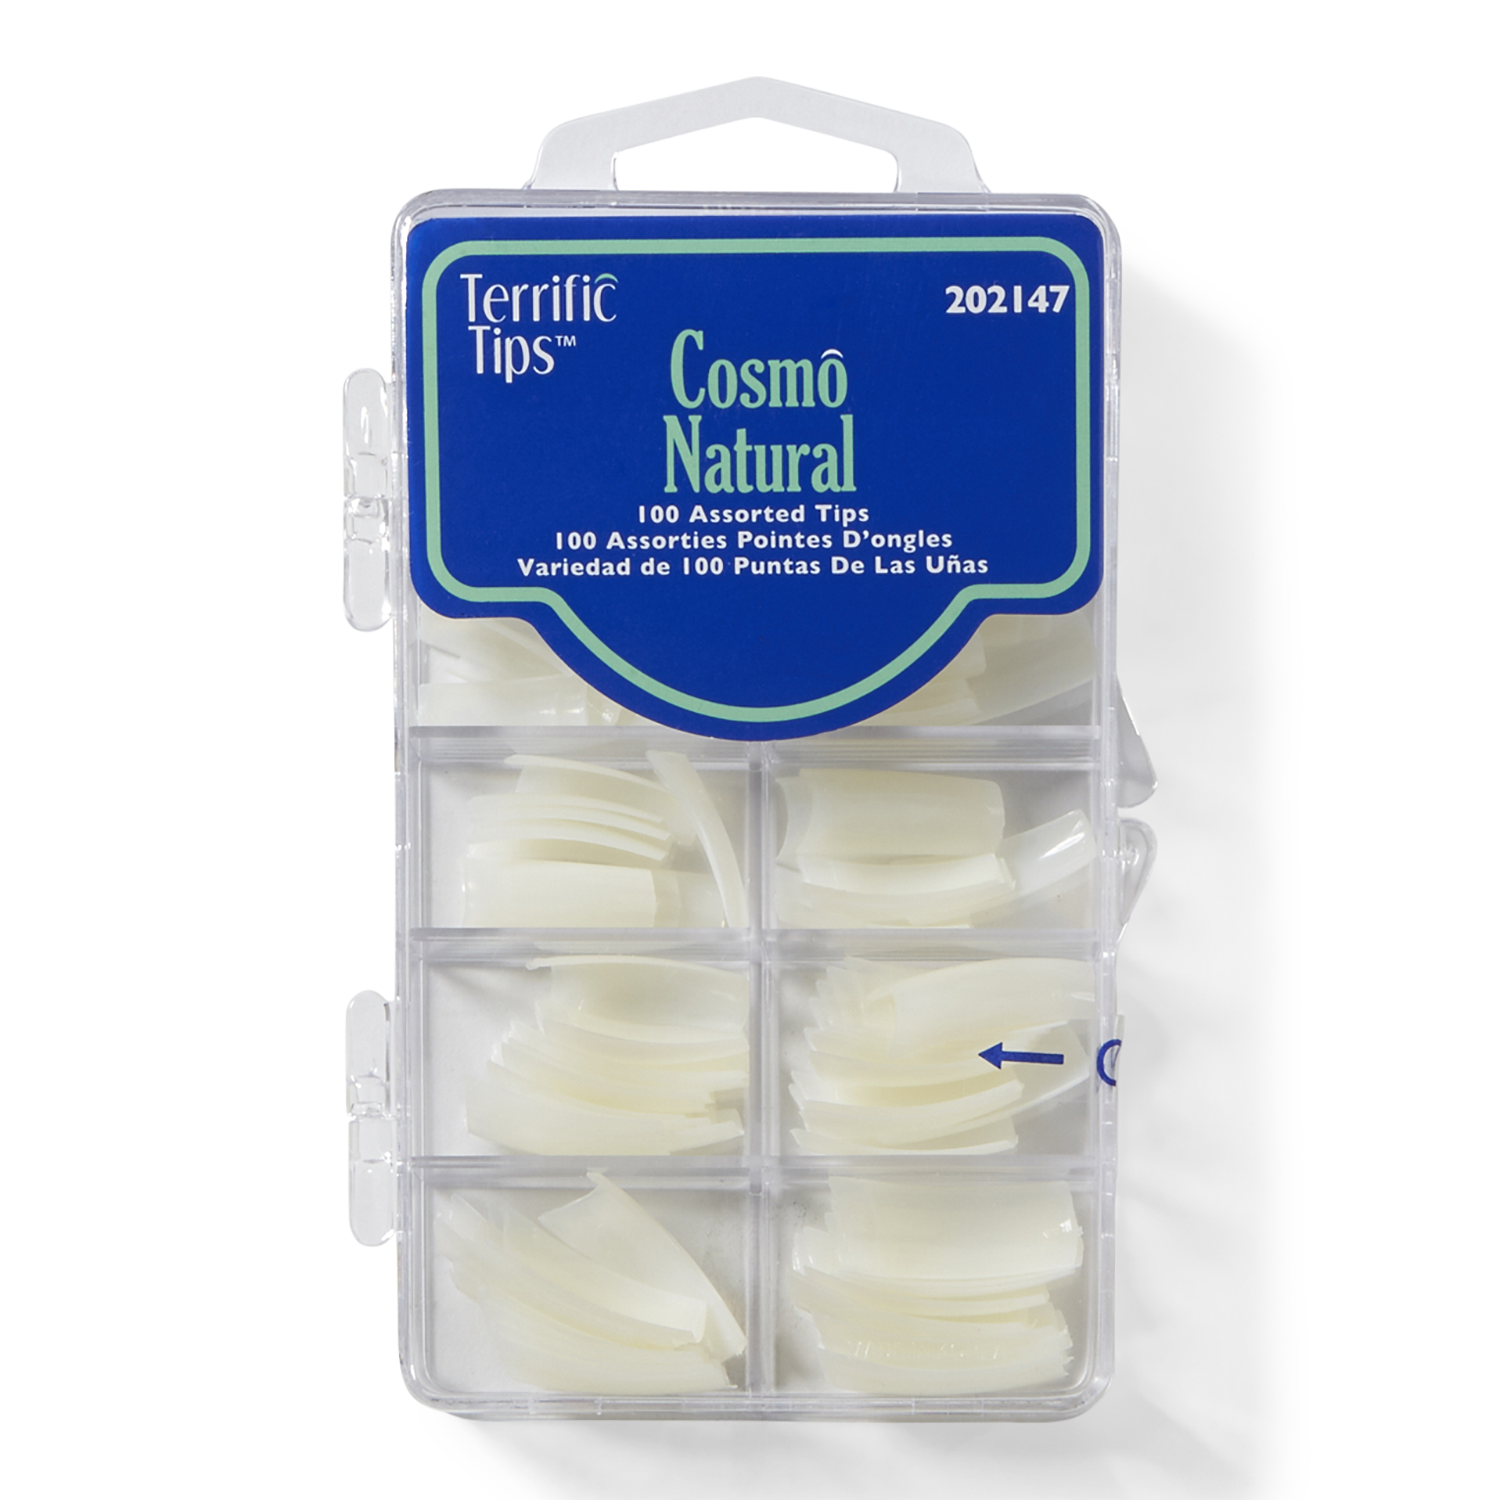 Terrific Tips Cosmo Natural Nail Tips Assorted